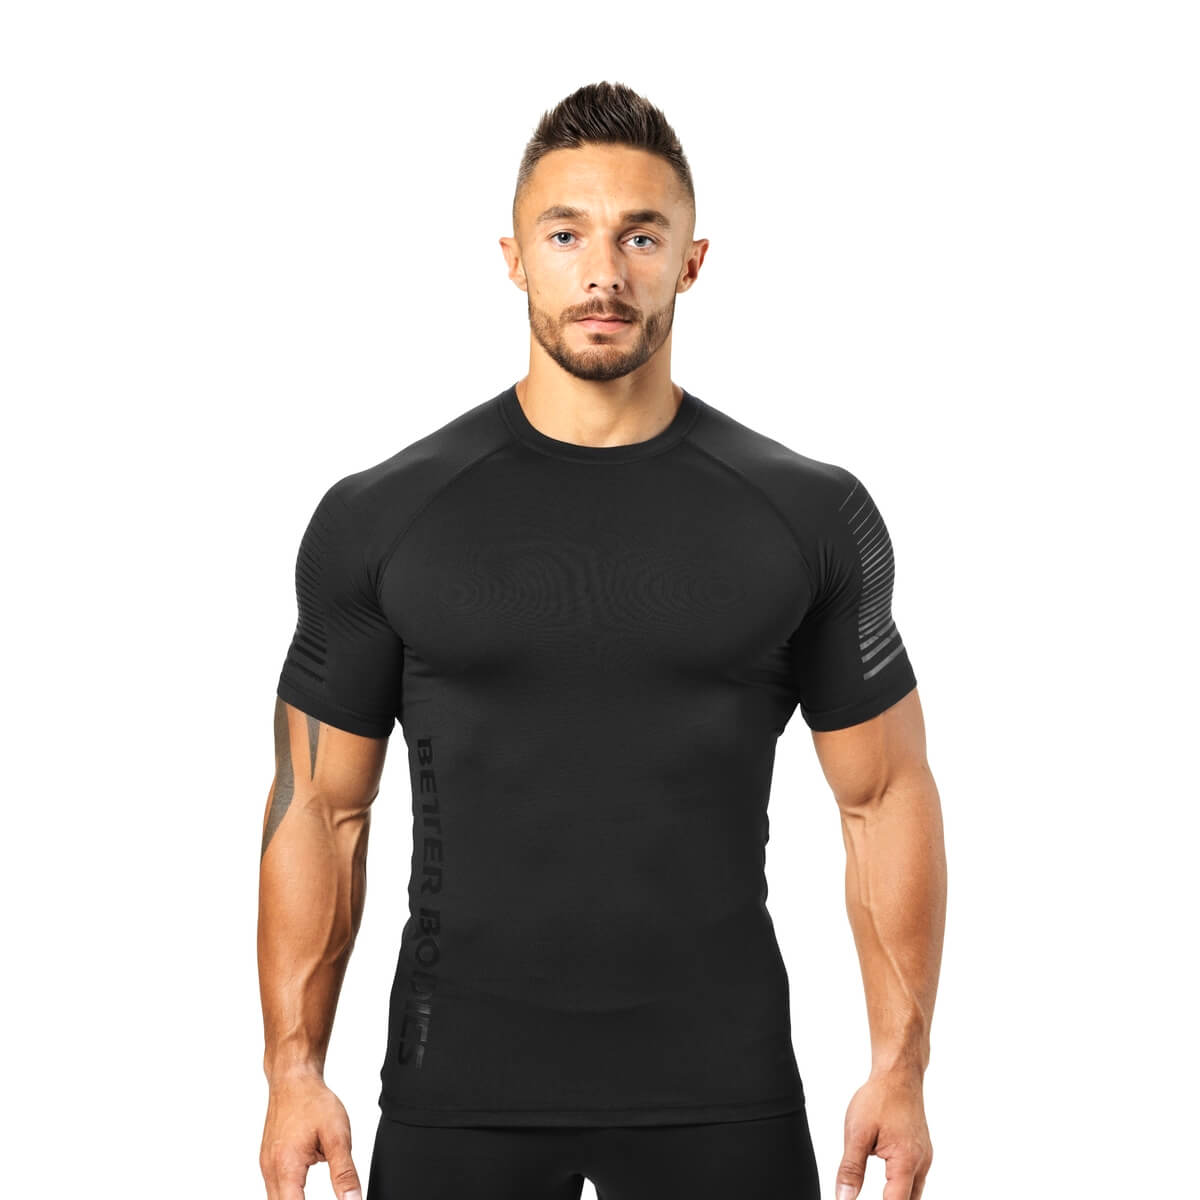 Performance PWR Tee, black, Better Bodies